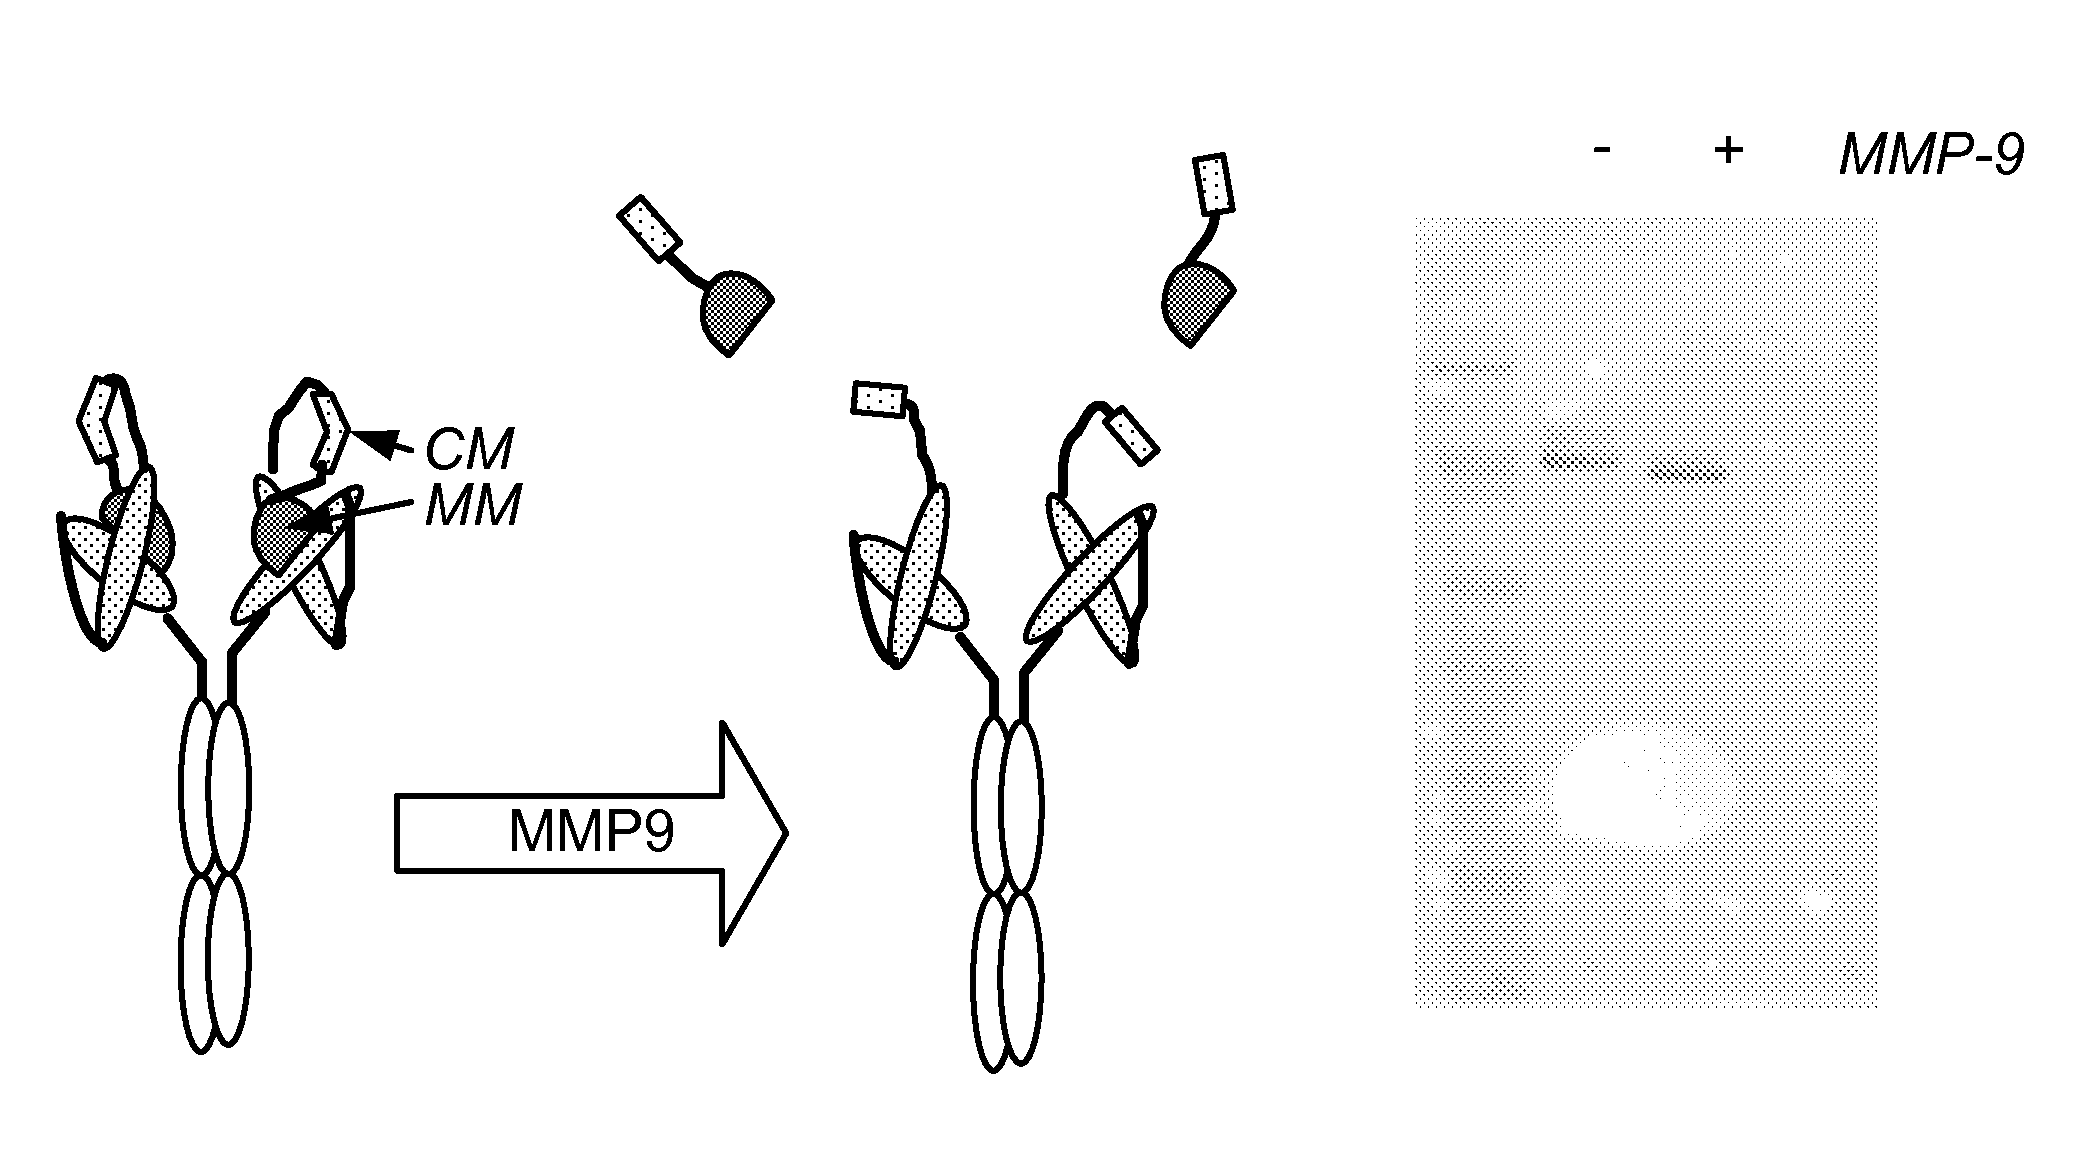 Modified antibody compositions, methods of making and using thereof